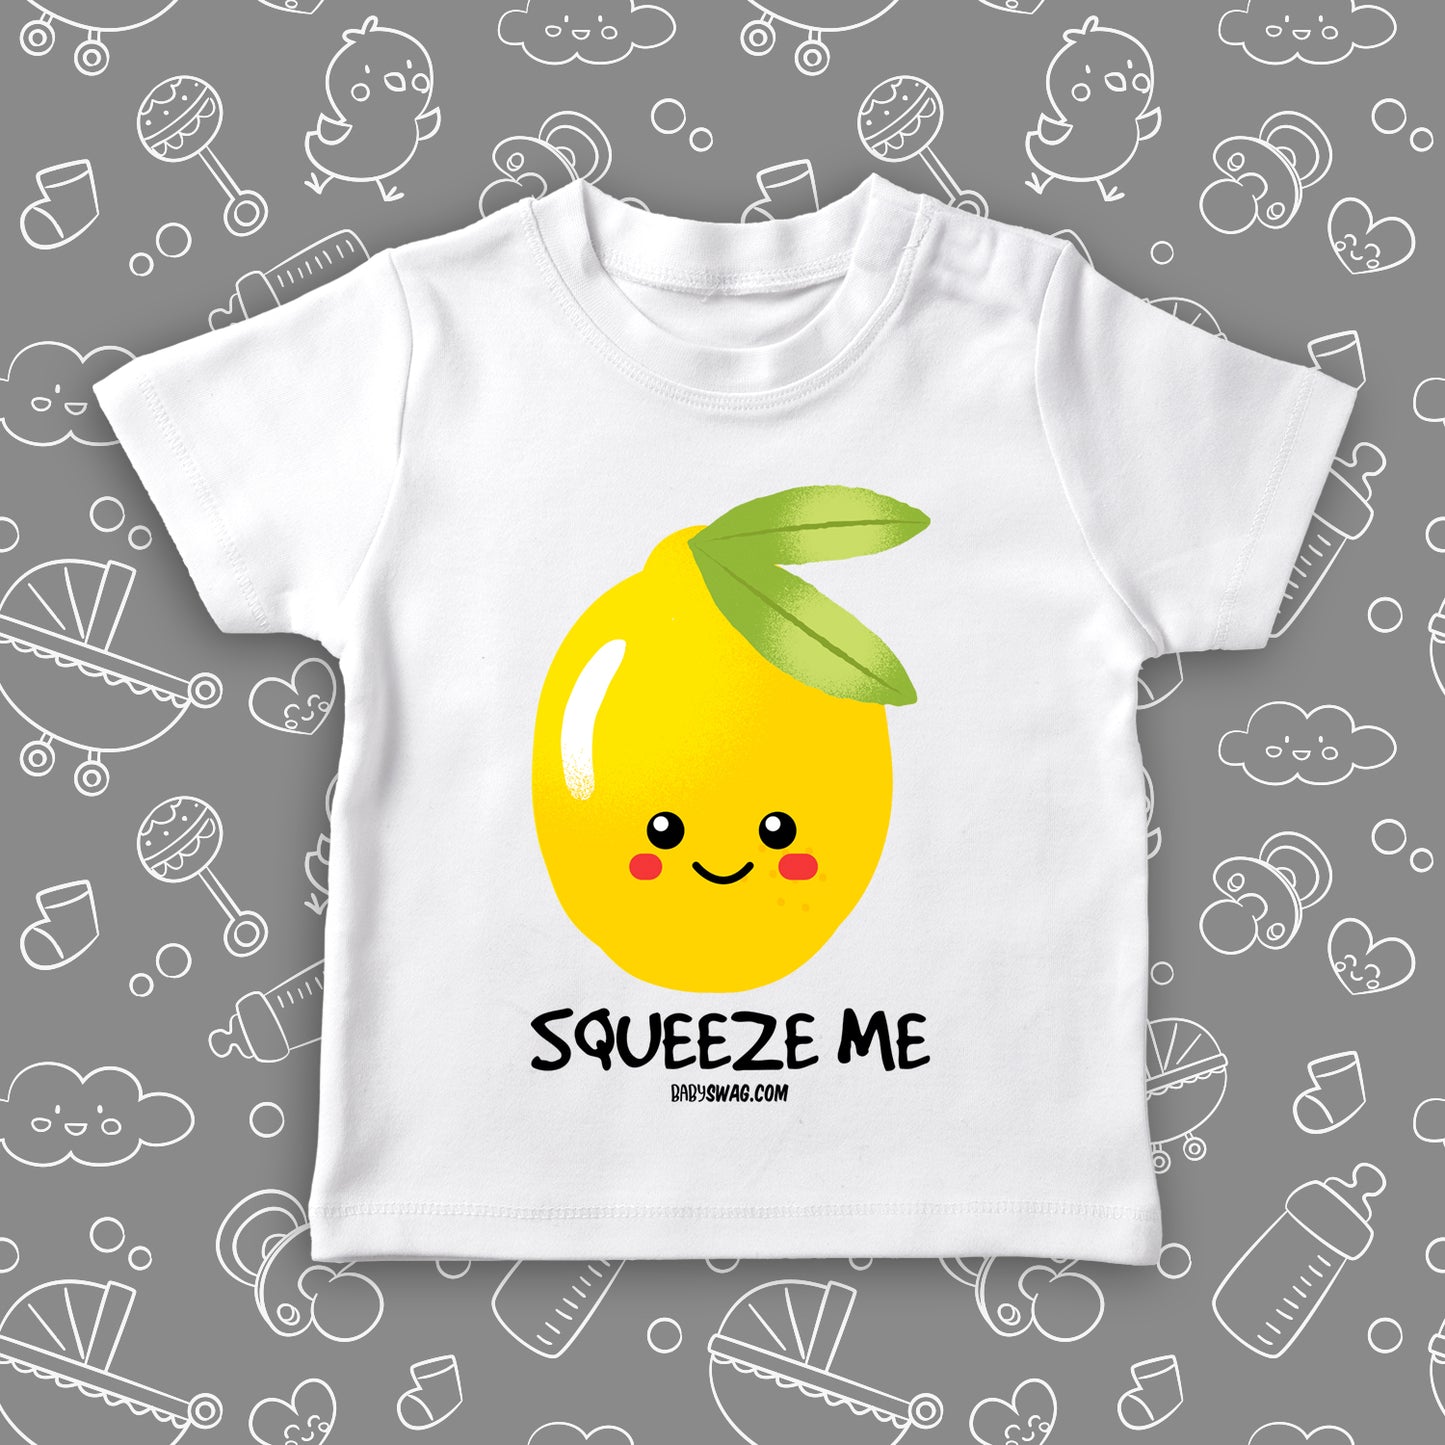 Squeeze Me (T)